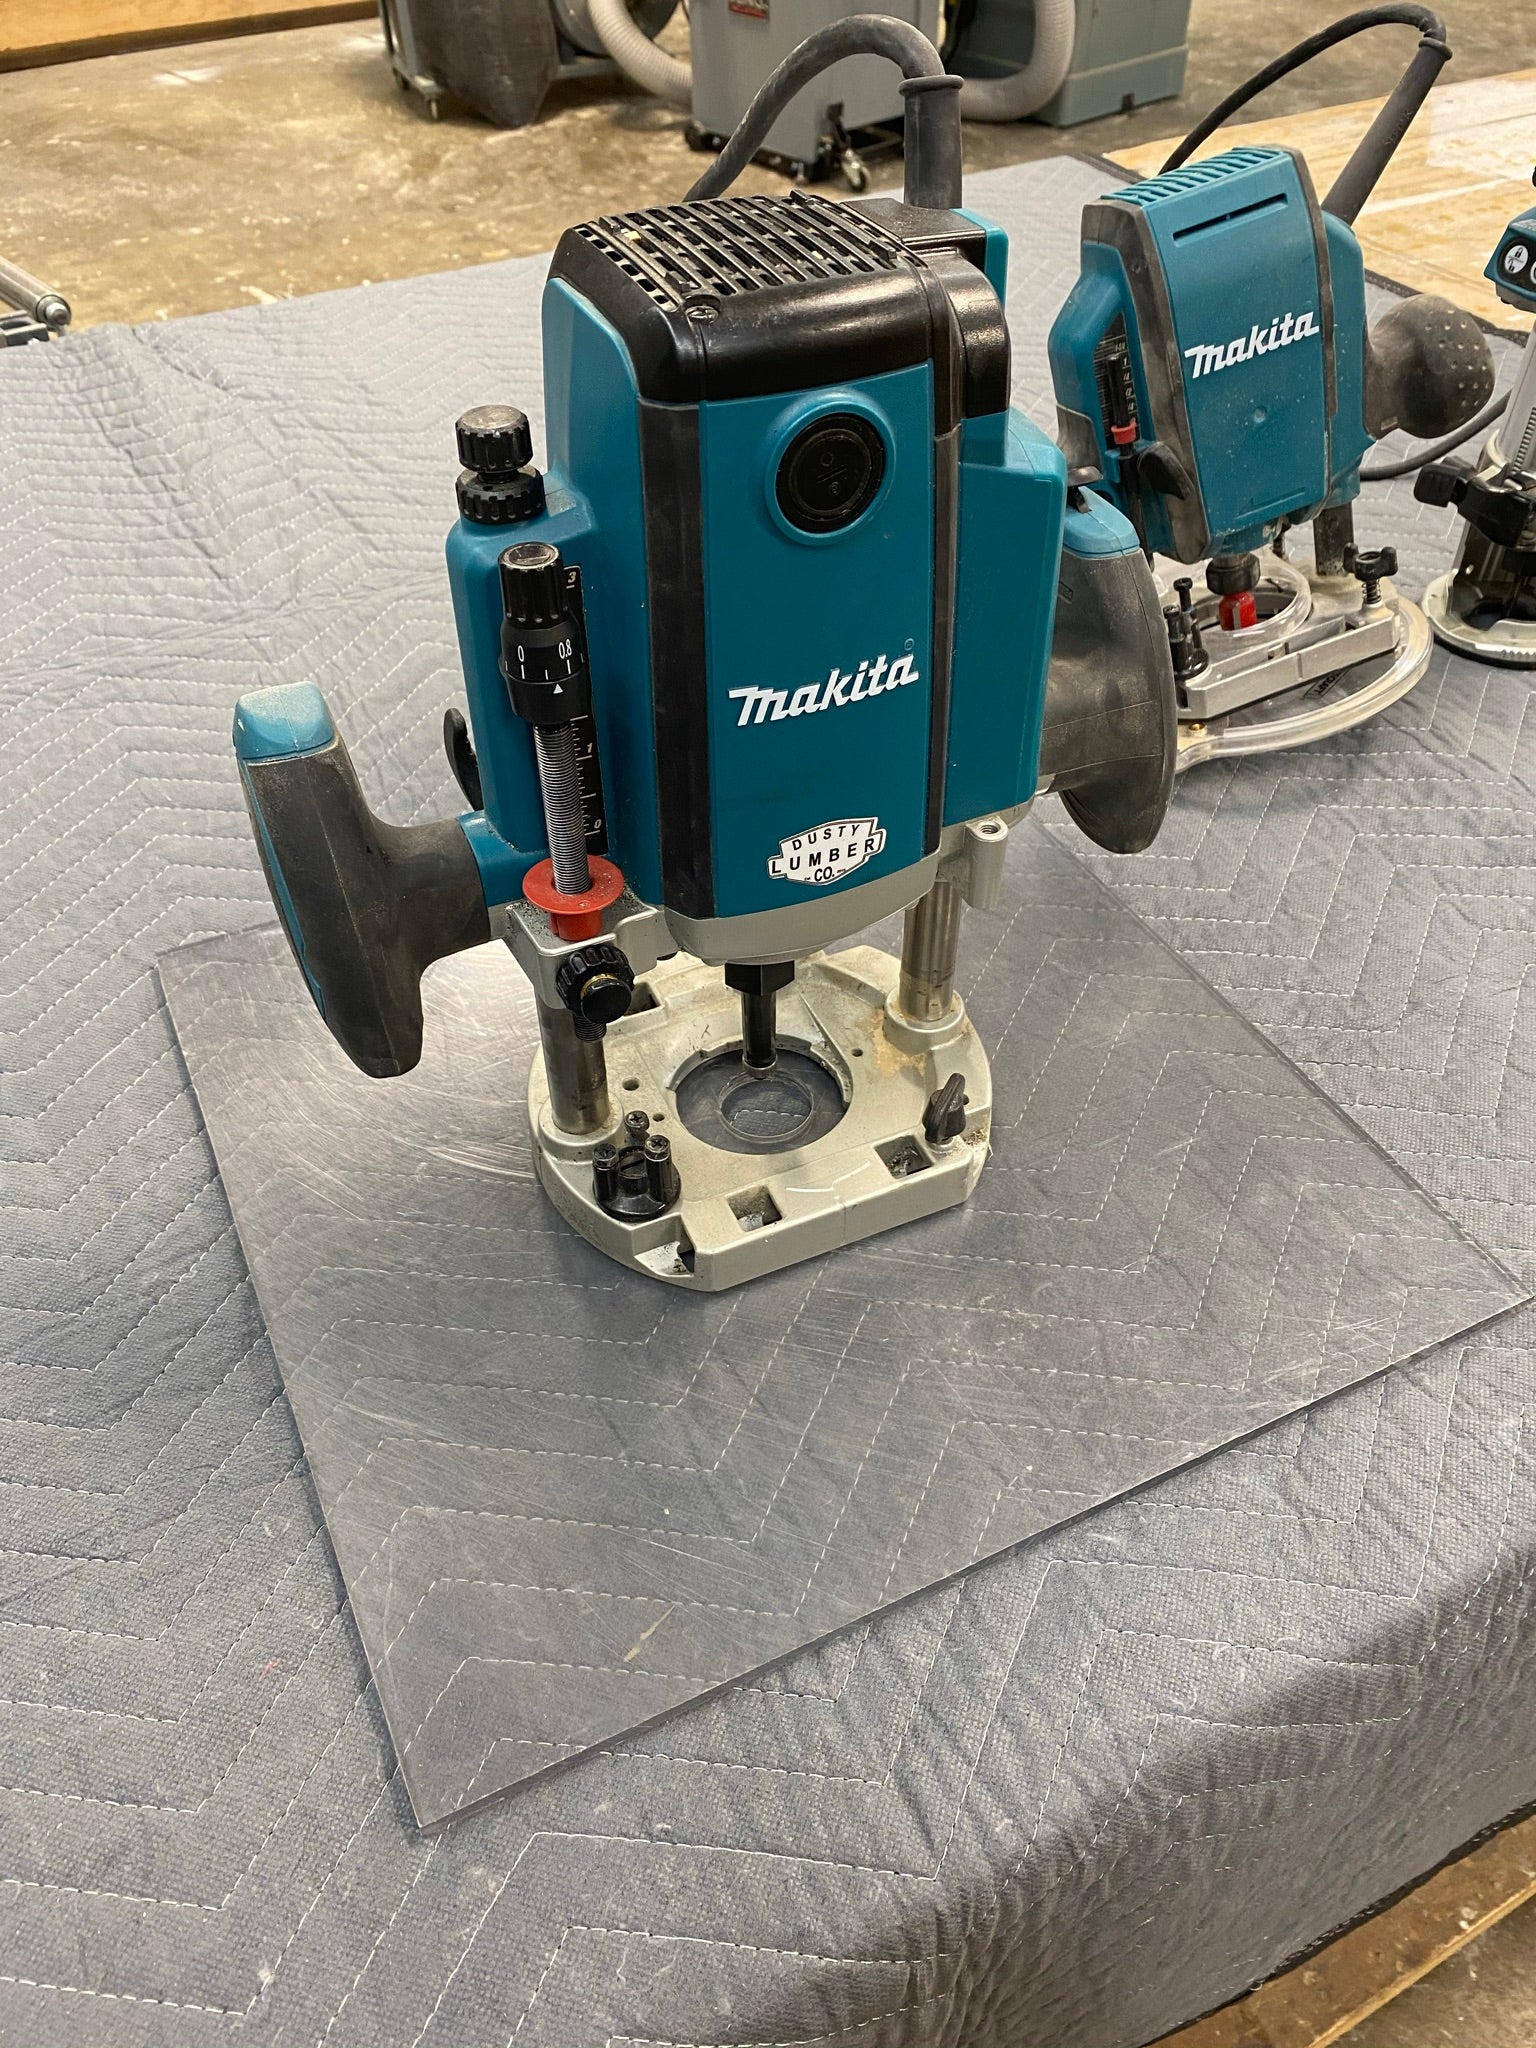 Makita Plunge Router with homemade plexiglass plate